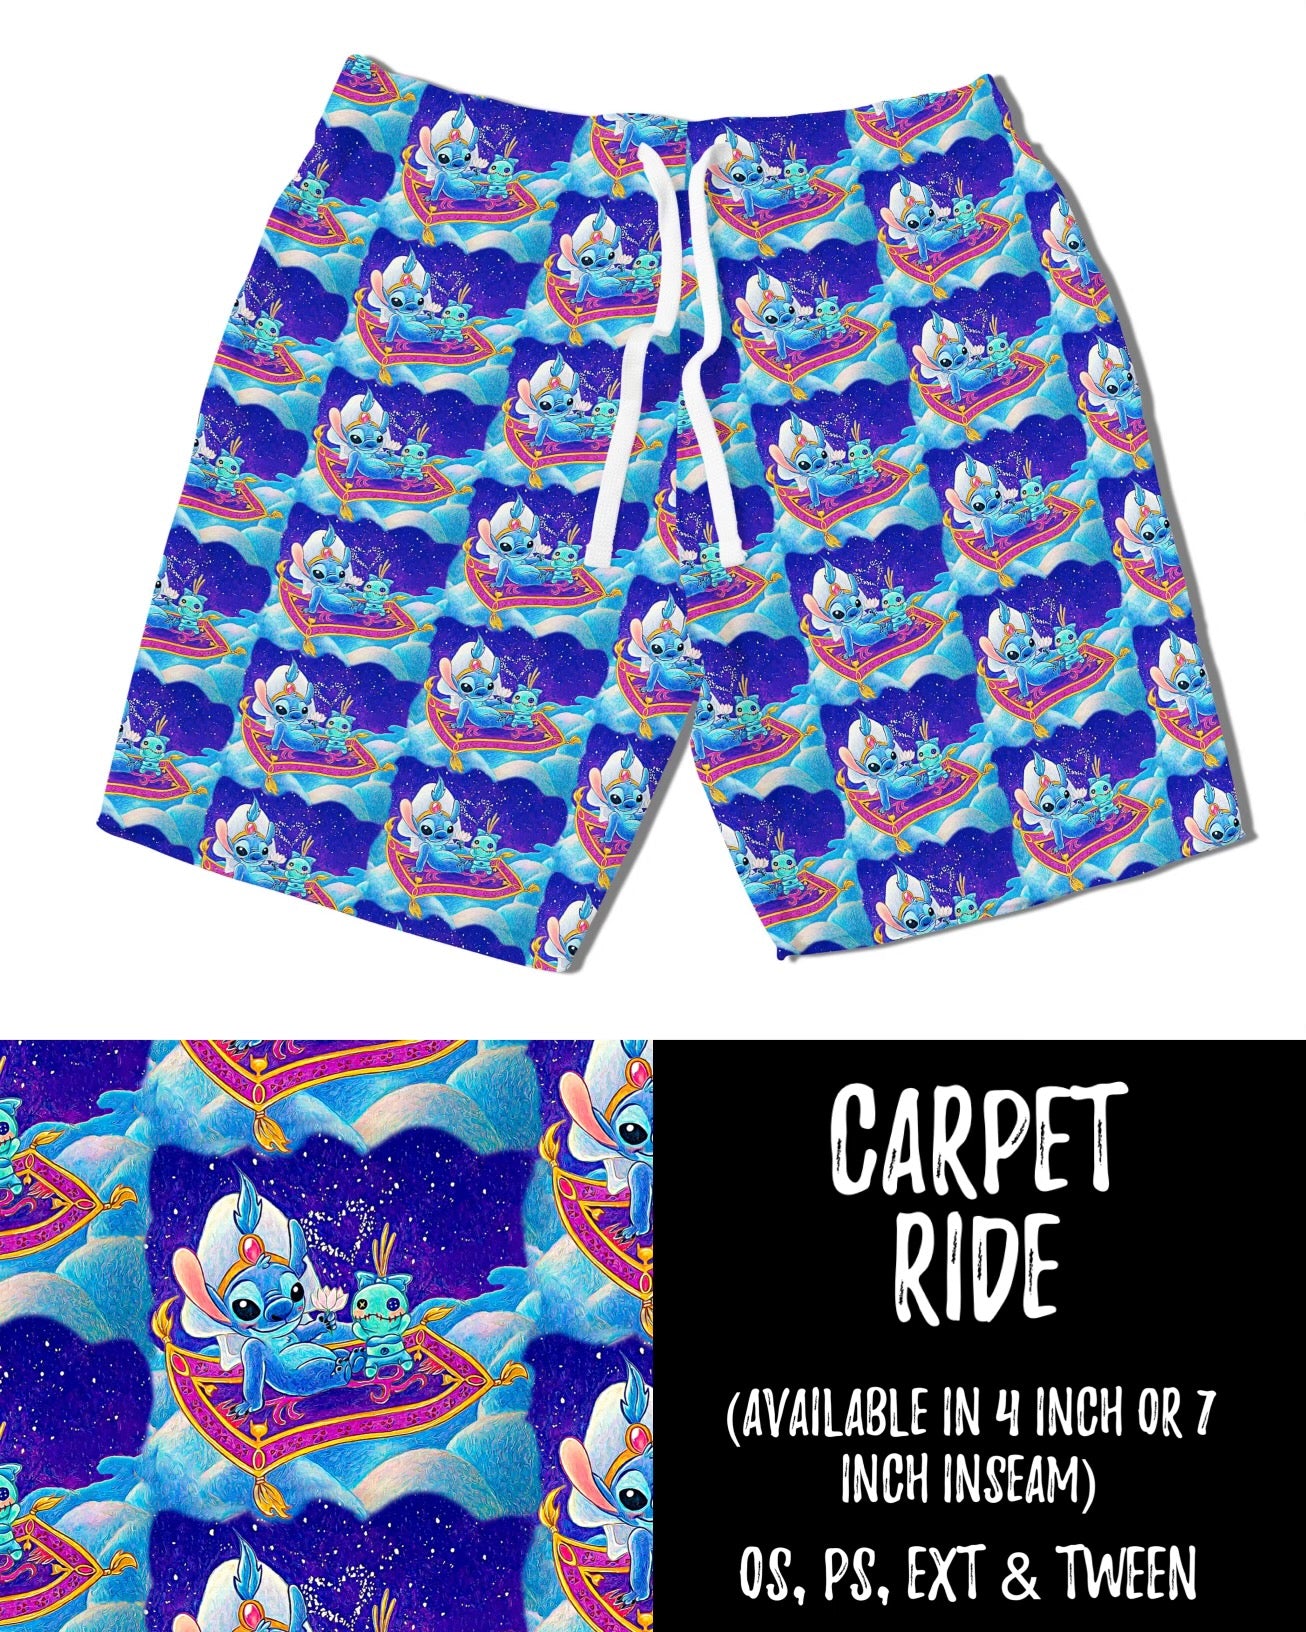 Carpet Ride SHORTS (4 INCH AND 7 INCH)